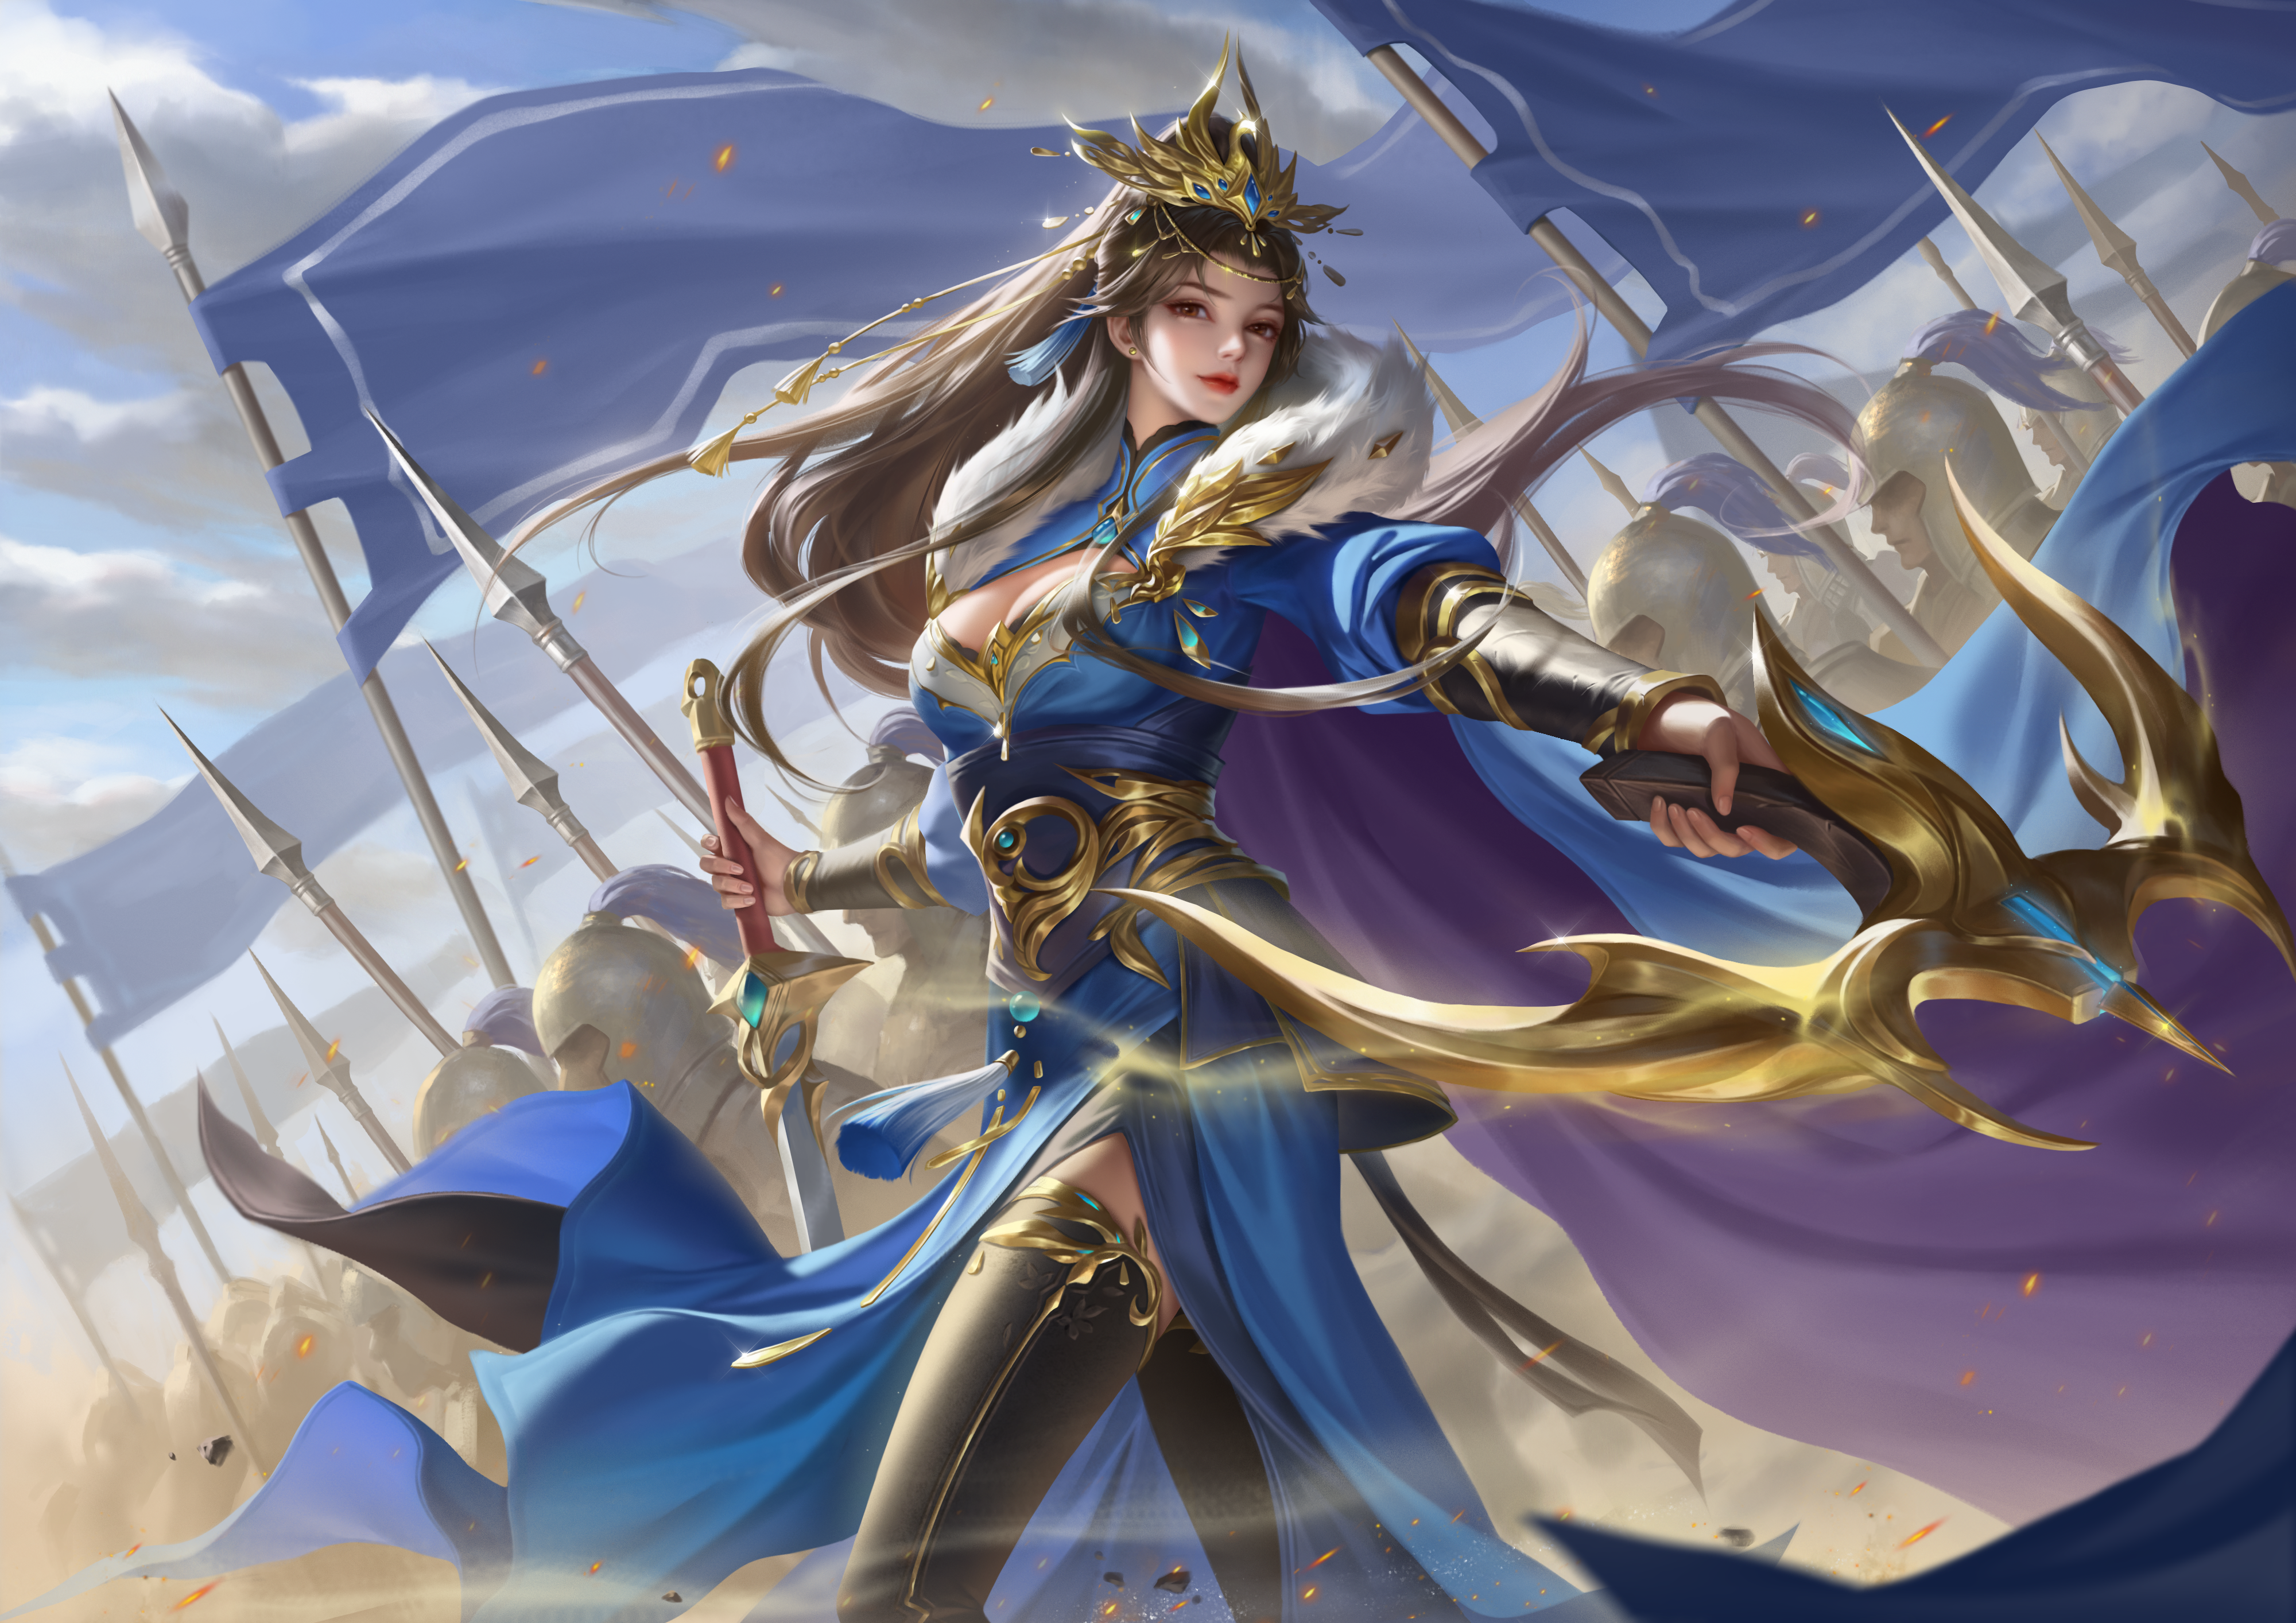 General 4000x2828 video game characters Three Kingdoms video games video game art video game girls armor video game men flag sword weapon